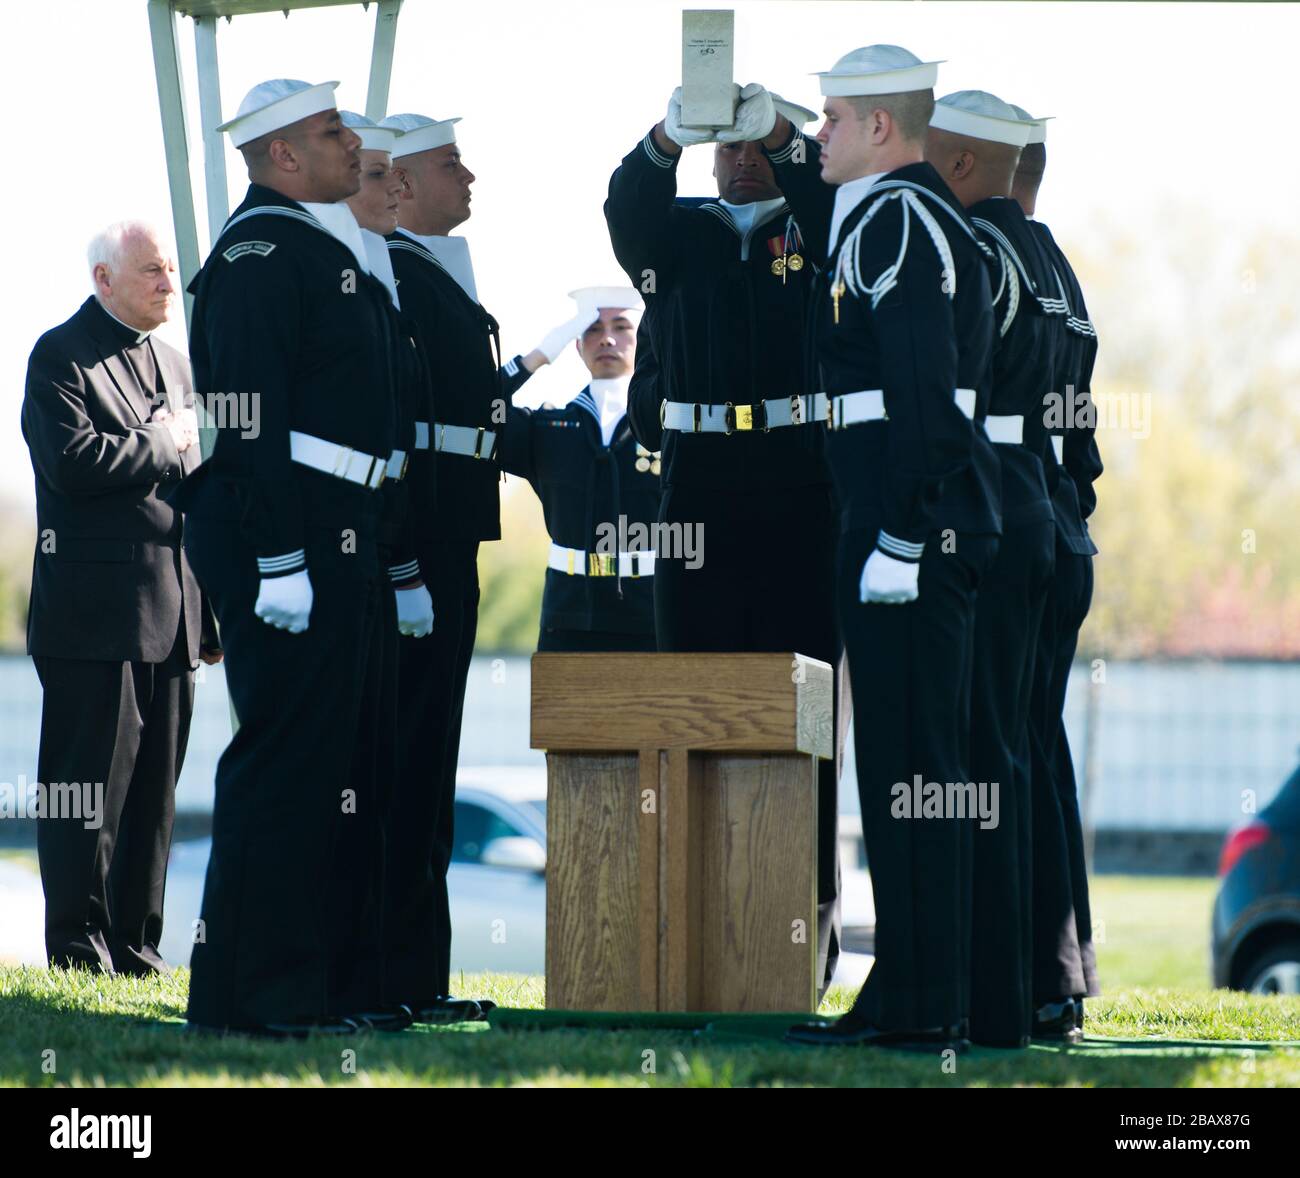 'Sailors participate in the graveside service for U.S. Navy Petty Officer 3rd Class Charles Thomas Dougherty in Arlington National Cemetery, April 18, 2016, in Arlington, Va. Dougherty was inurned in ANC’s Columbarium Court 9. (U.S. Army photo Rachel Larue/Arlington National Cemetery/Rachel Larue); 18 April 2016, 09:10; Graveside Service for U.S. Navy Petty Officer 3rd Class Charles Thomas Dougherty in Arlington National Cemetery; Arlington National Cemetery; ' Stock Photo